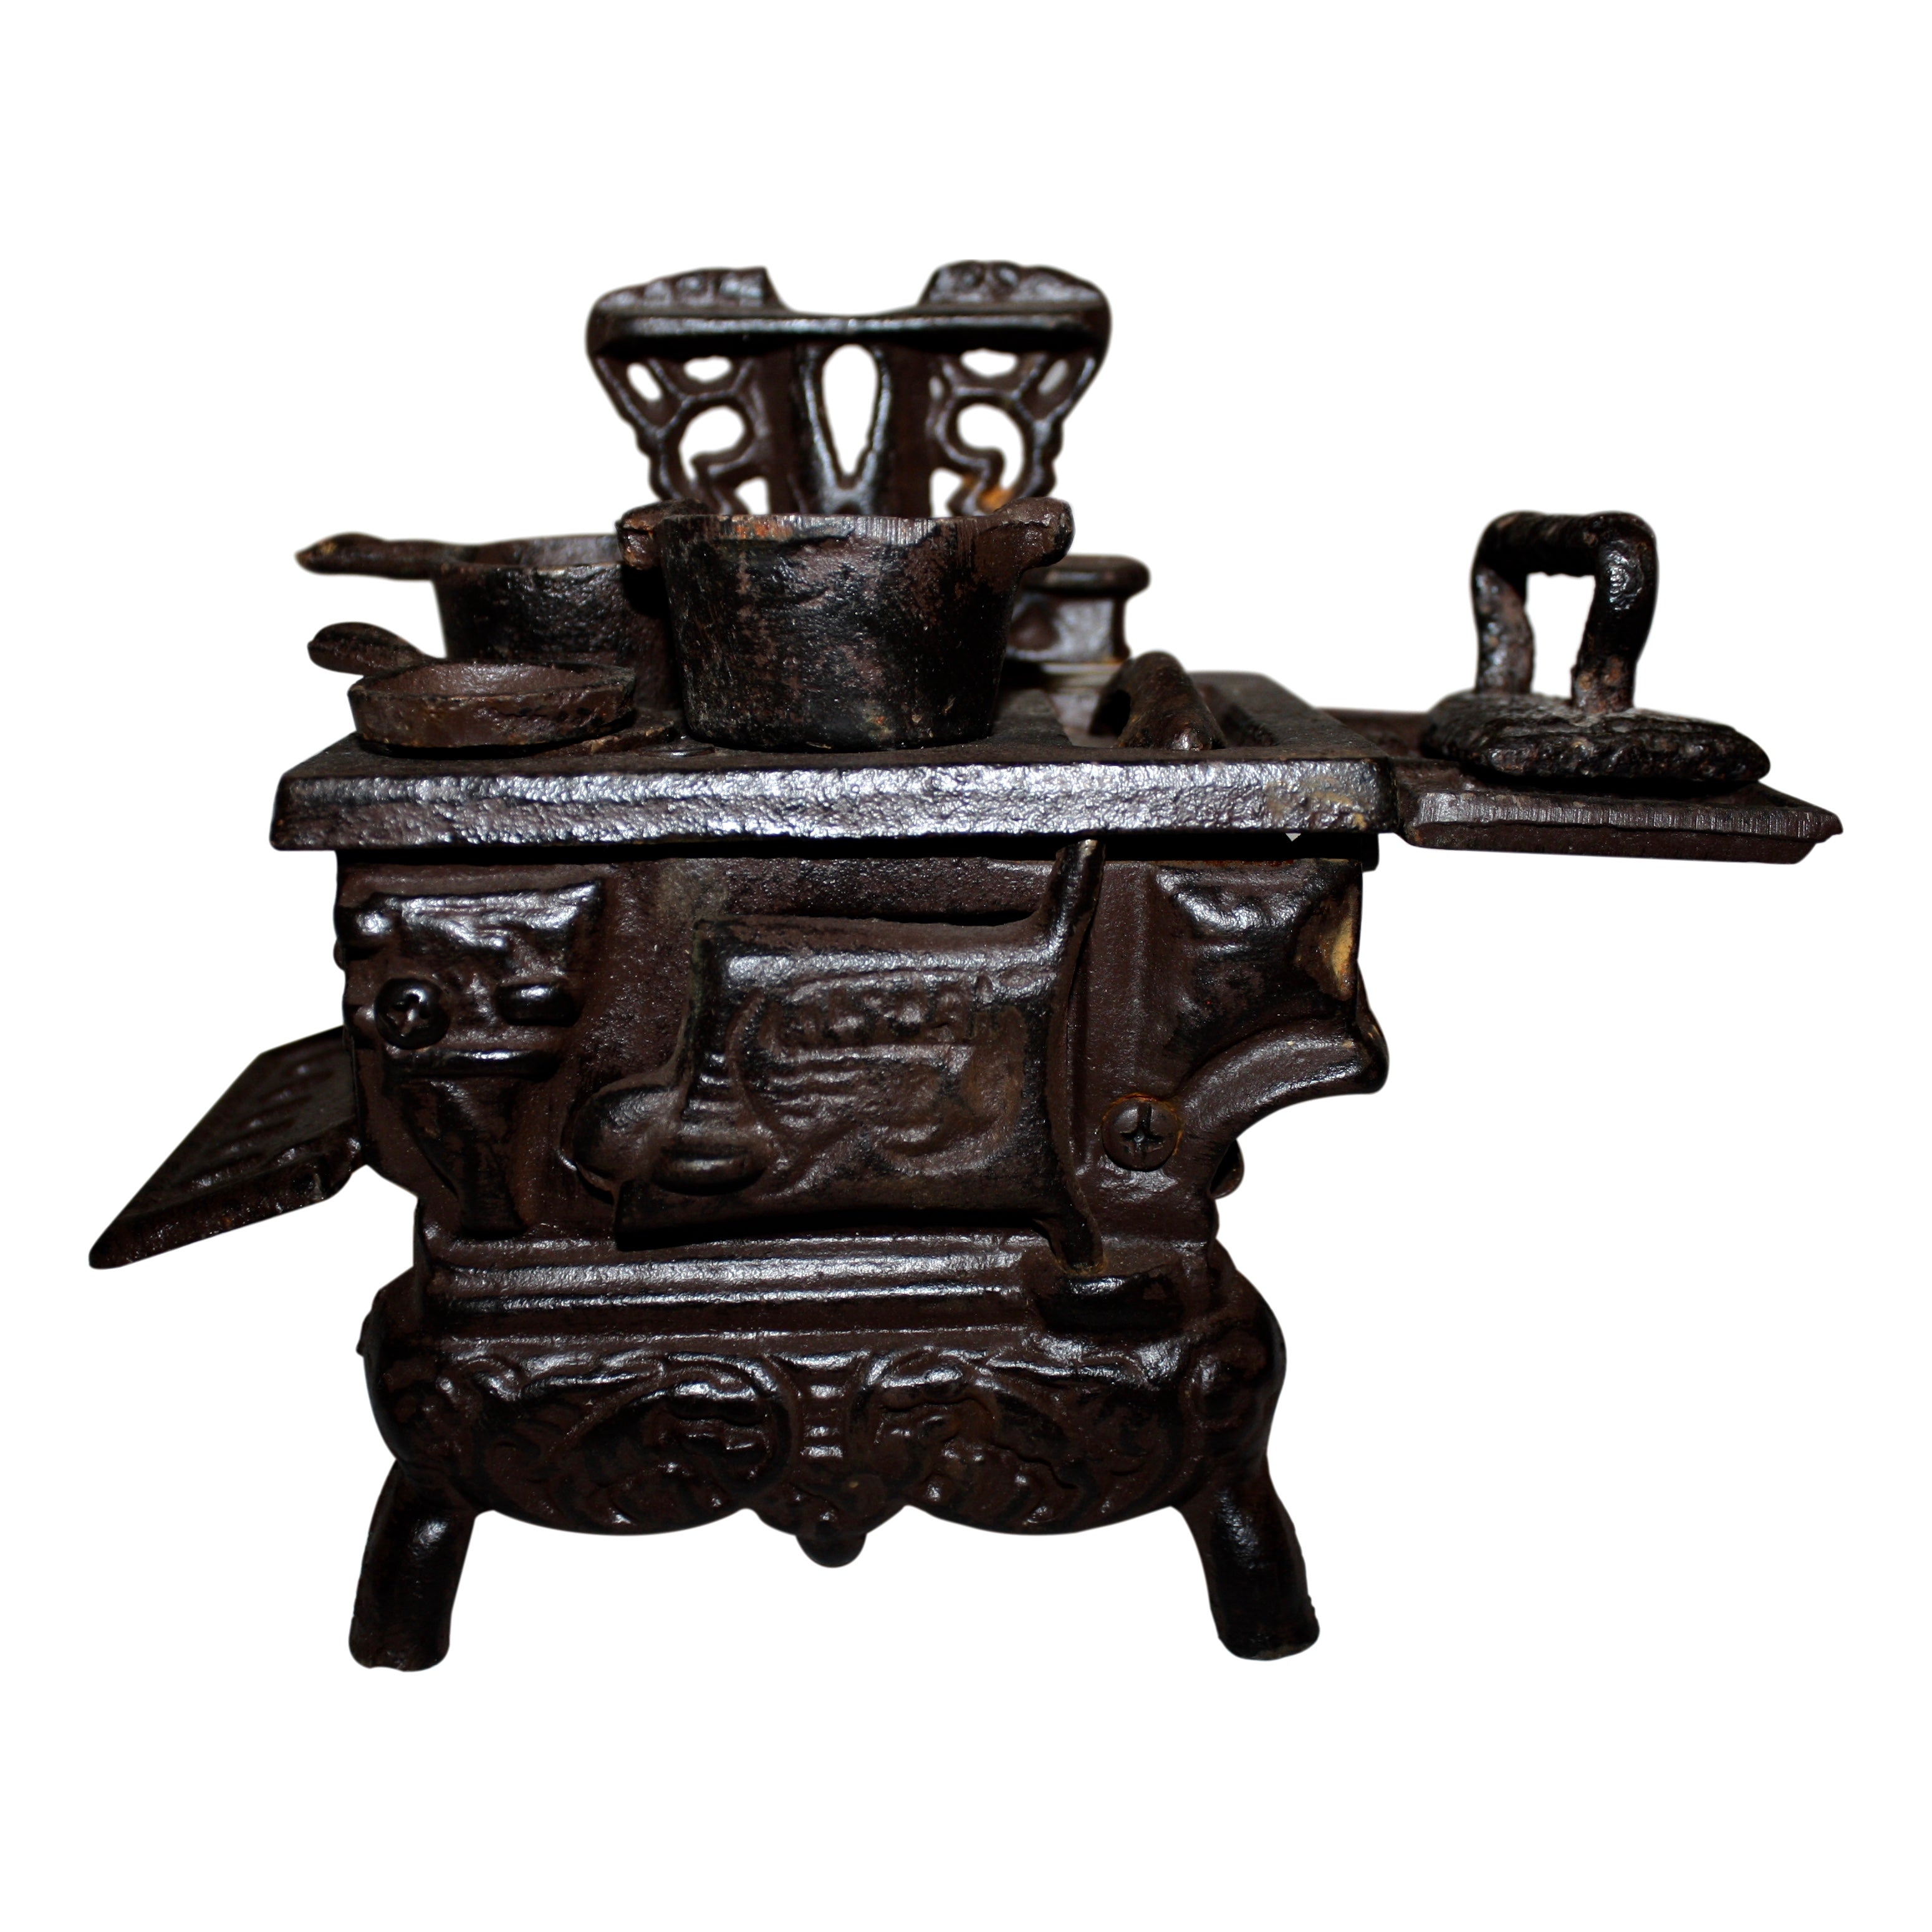 Miniature Cast Iron Stove with Accessories